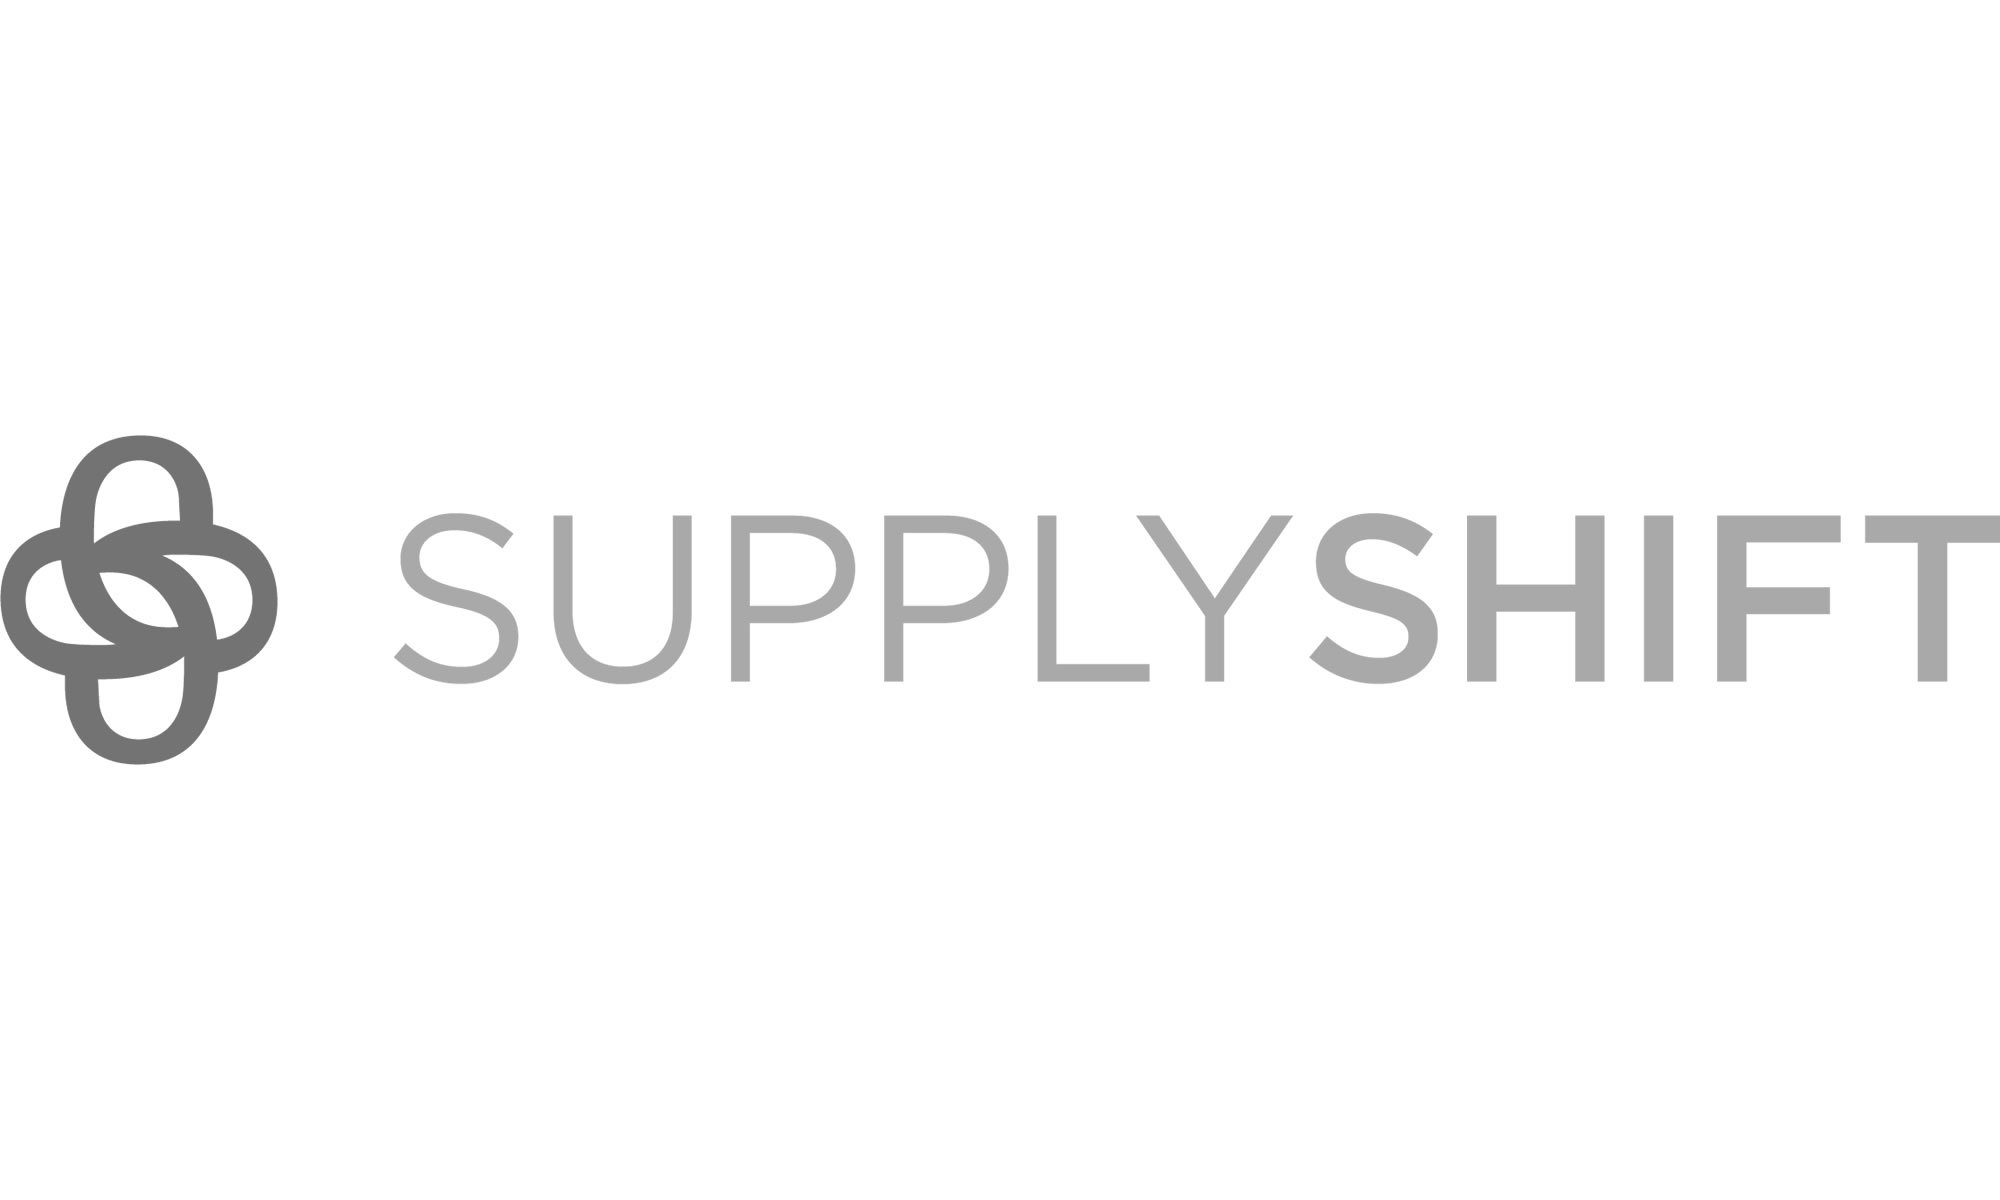 Responsible supply chain software that helps you discover the insights you need to deliver the best products possible — for your business, people, and the planet.